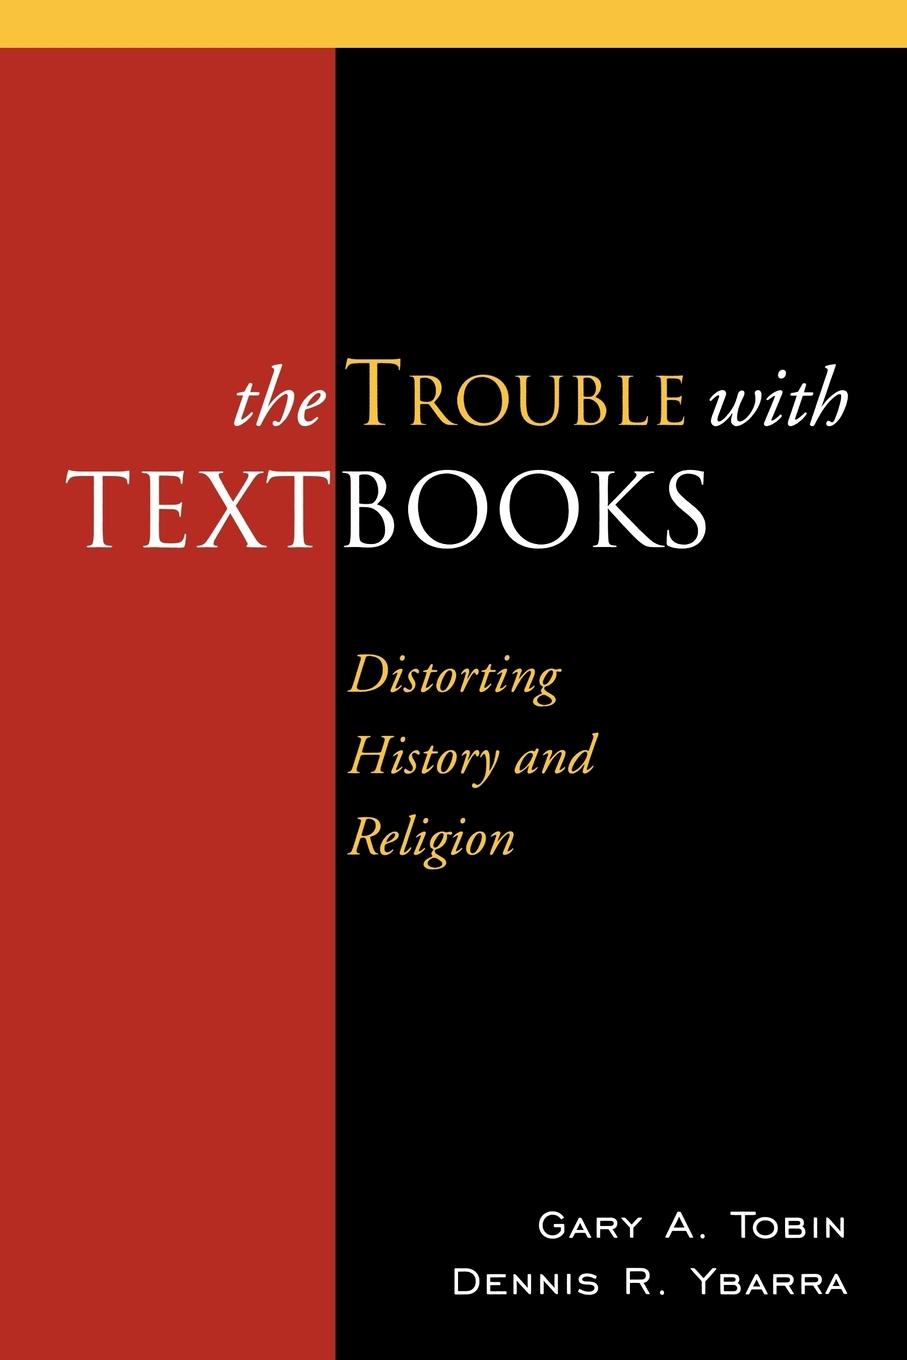 The Trouble with Textbooks - Tobin, Gary A. Ybarra, Dennis R.